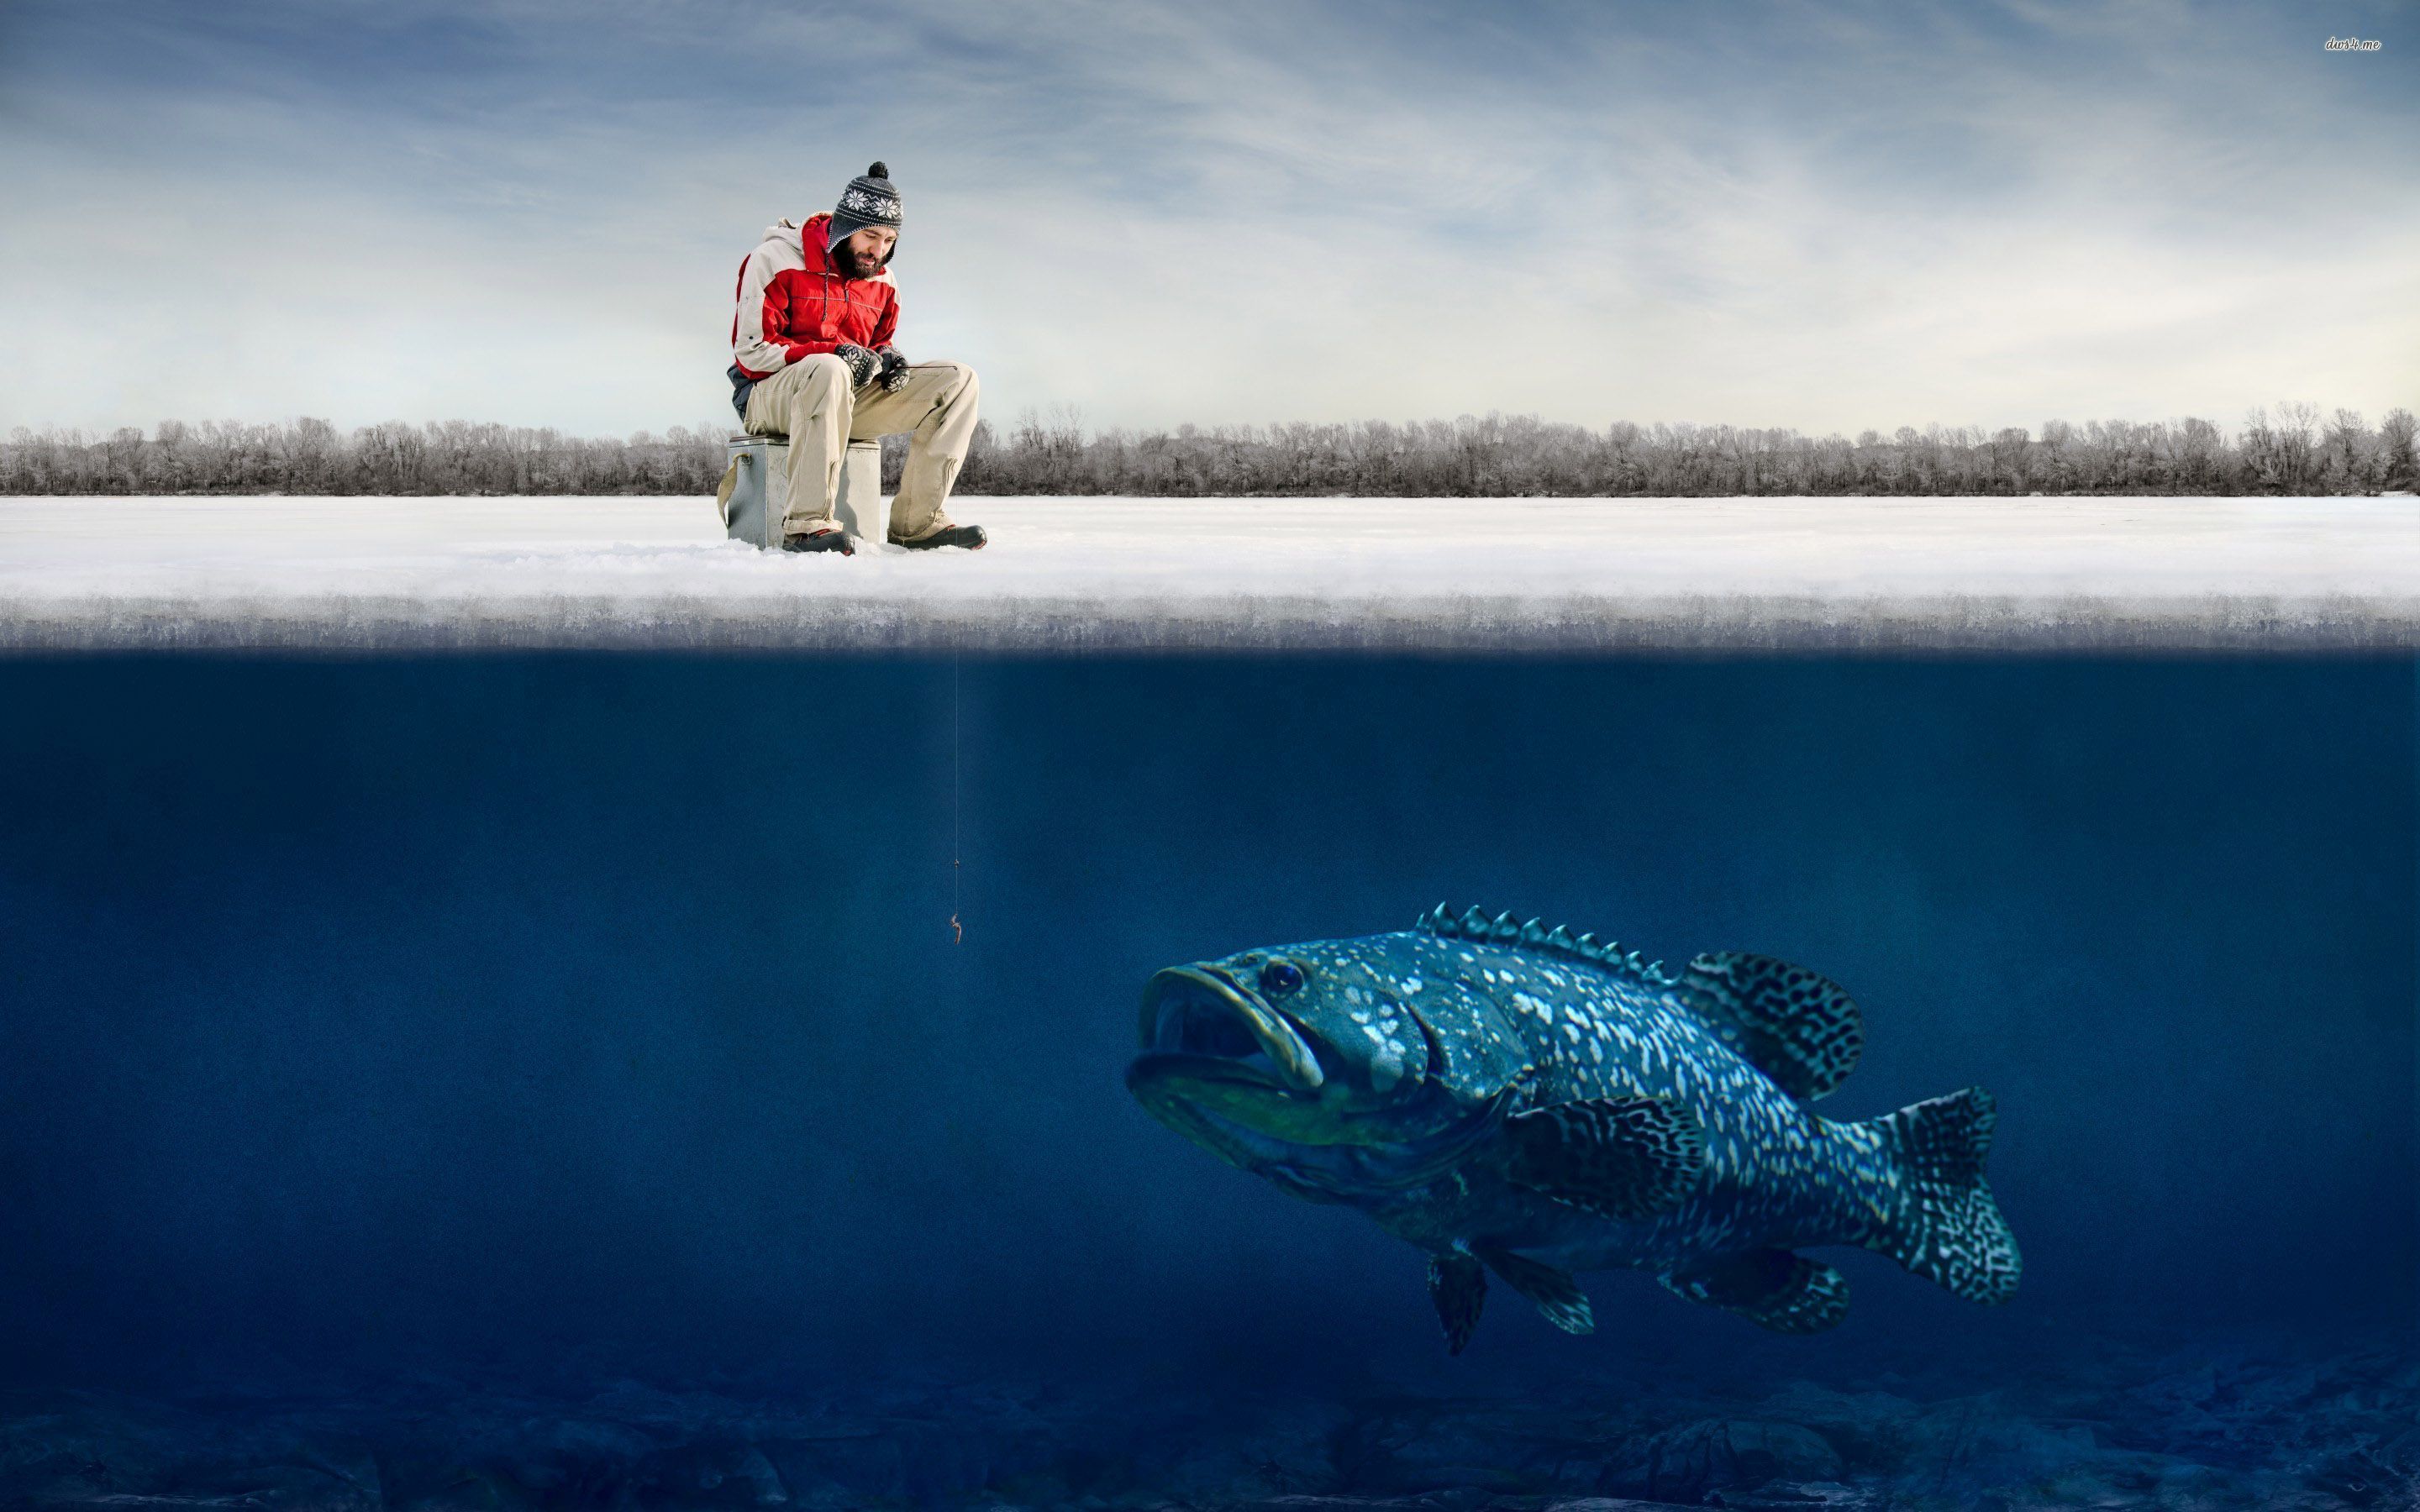 Ice Fishing wallpaper - Artistic wallpapers -